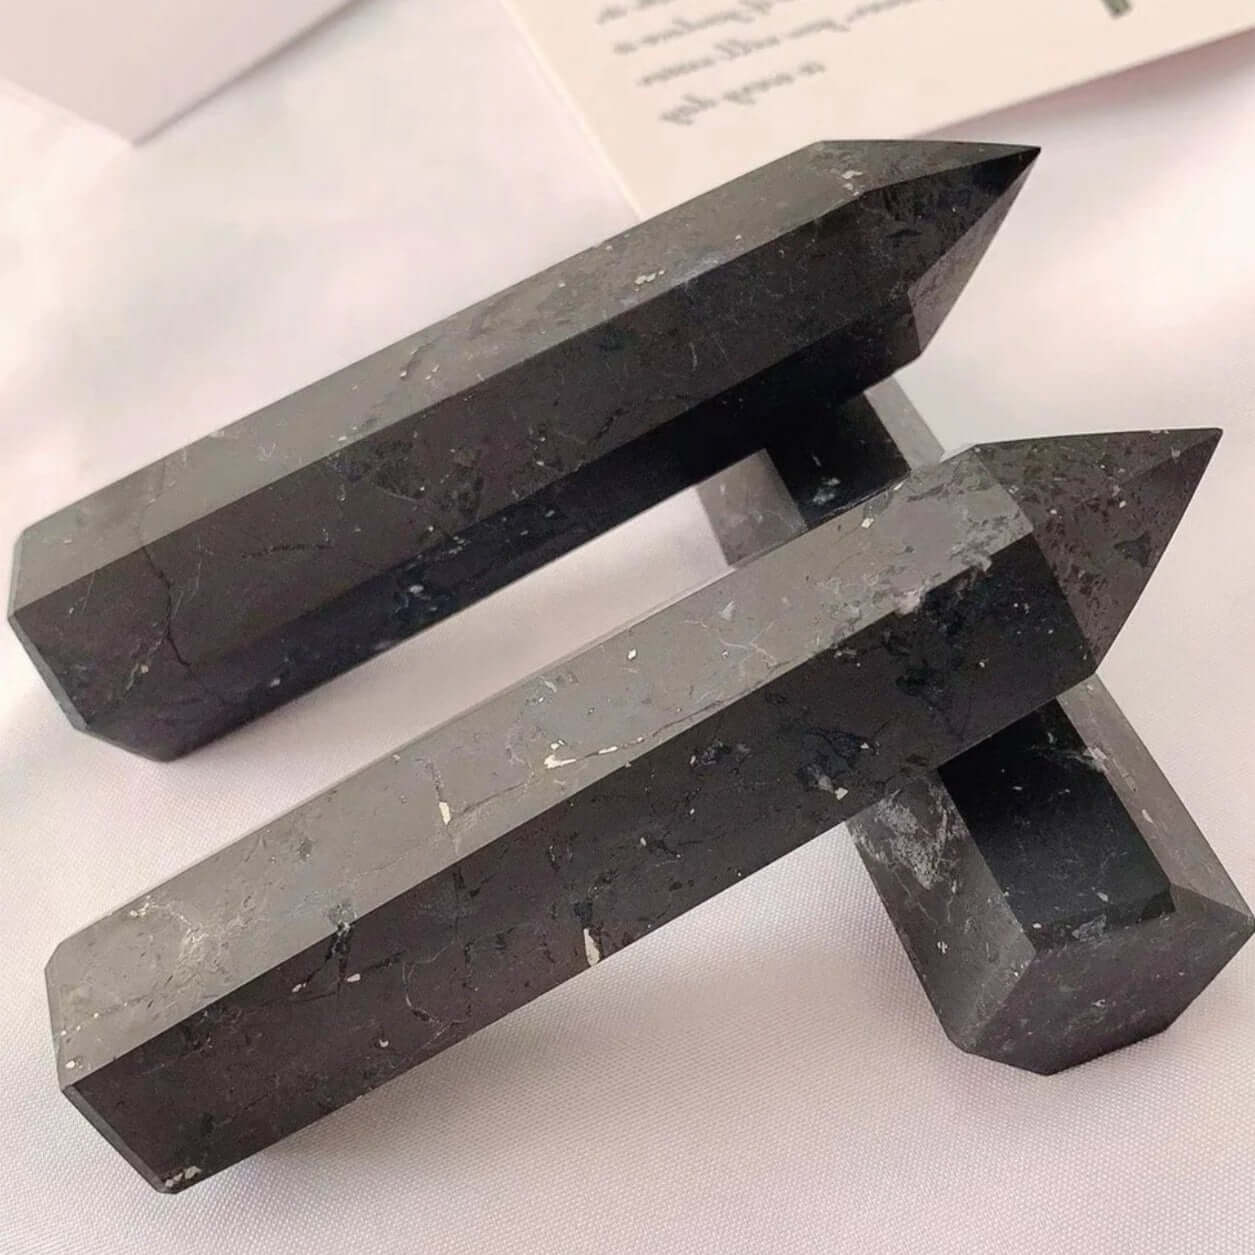 Real Shungite Tower Tips - Source of Energy and Protection